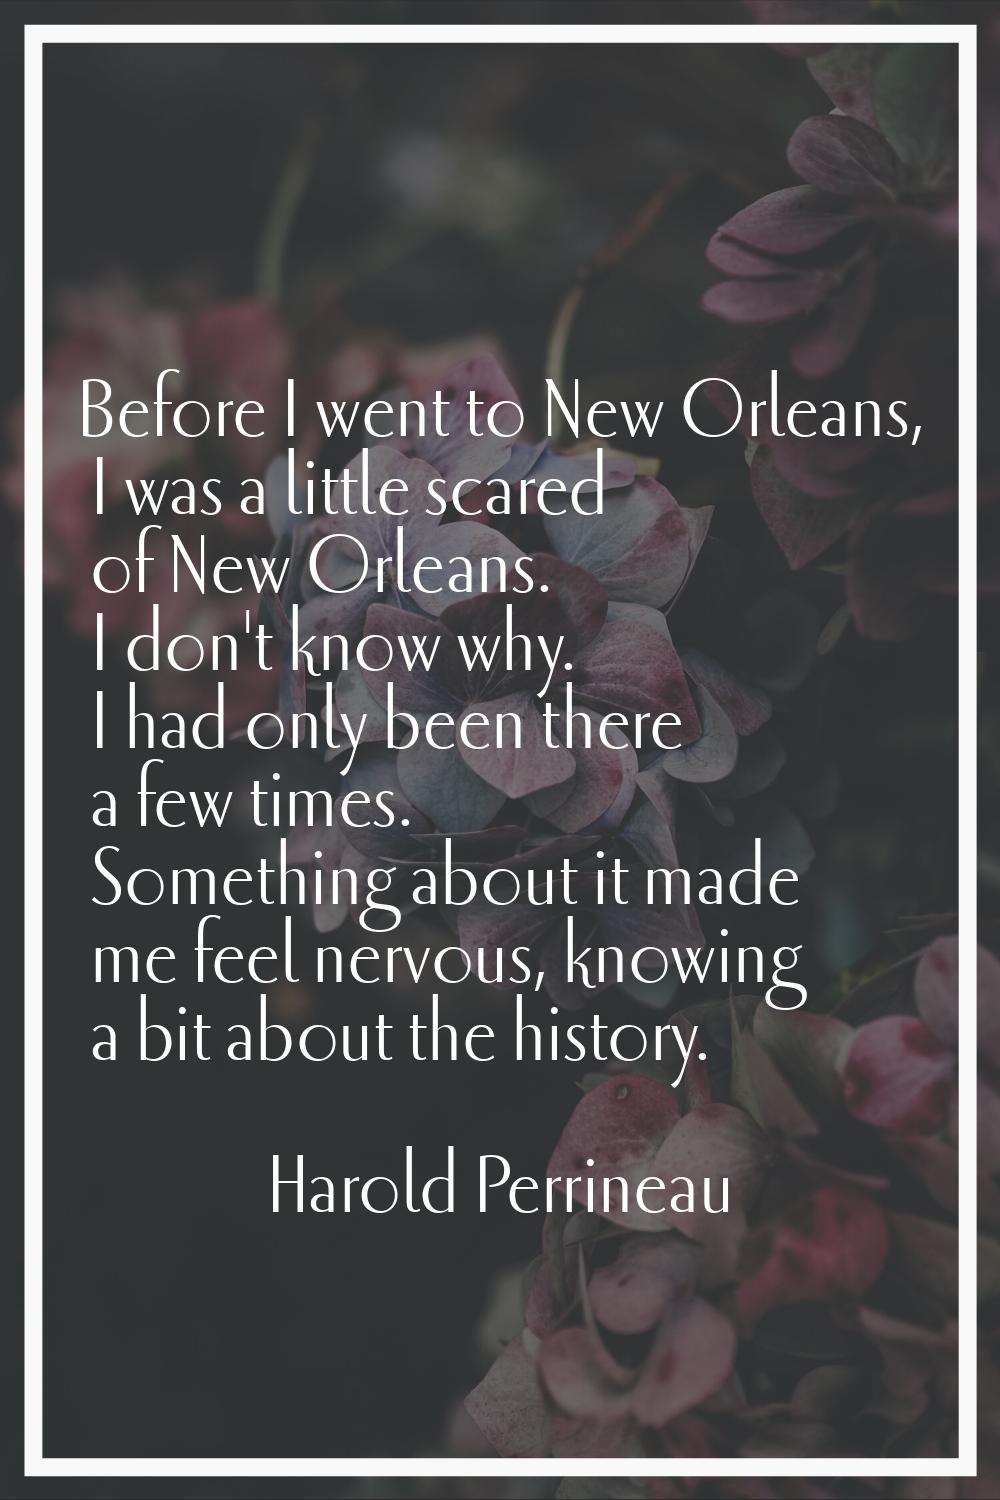 Before I went to New Orleans, I was a little scared of New Orleans. I don't know why. I had only be